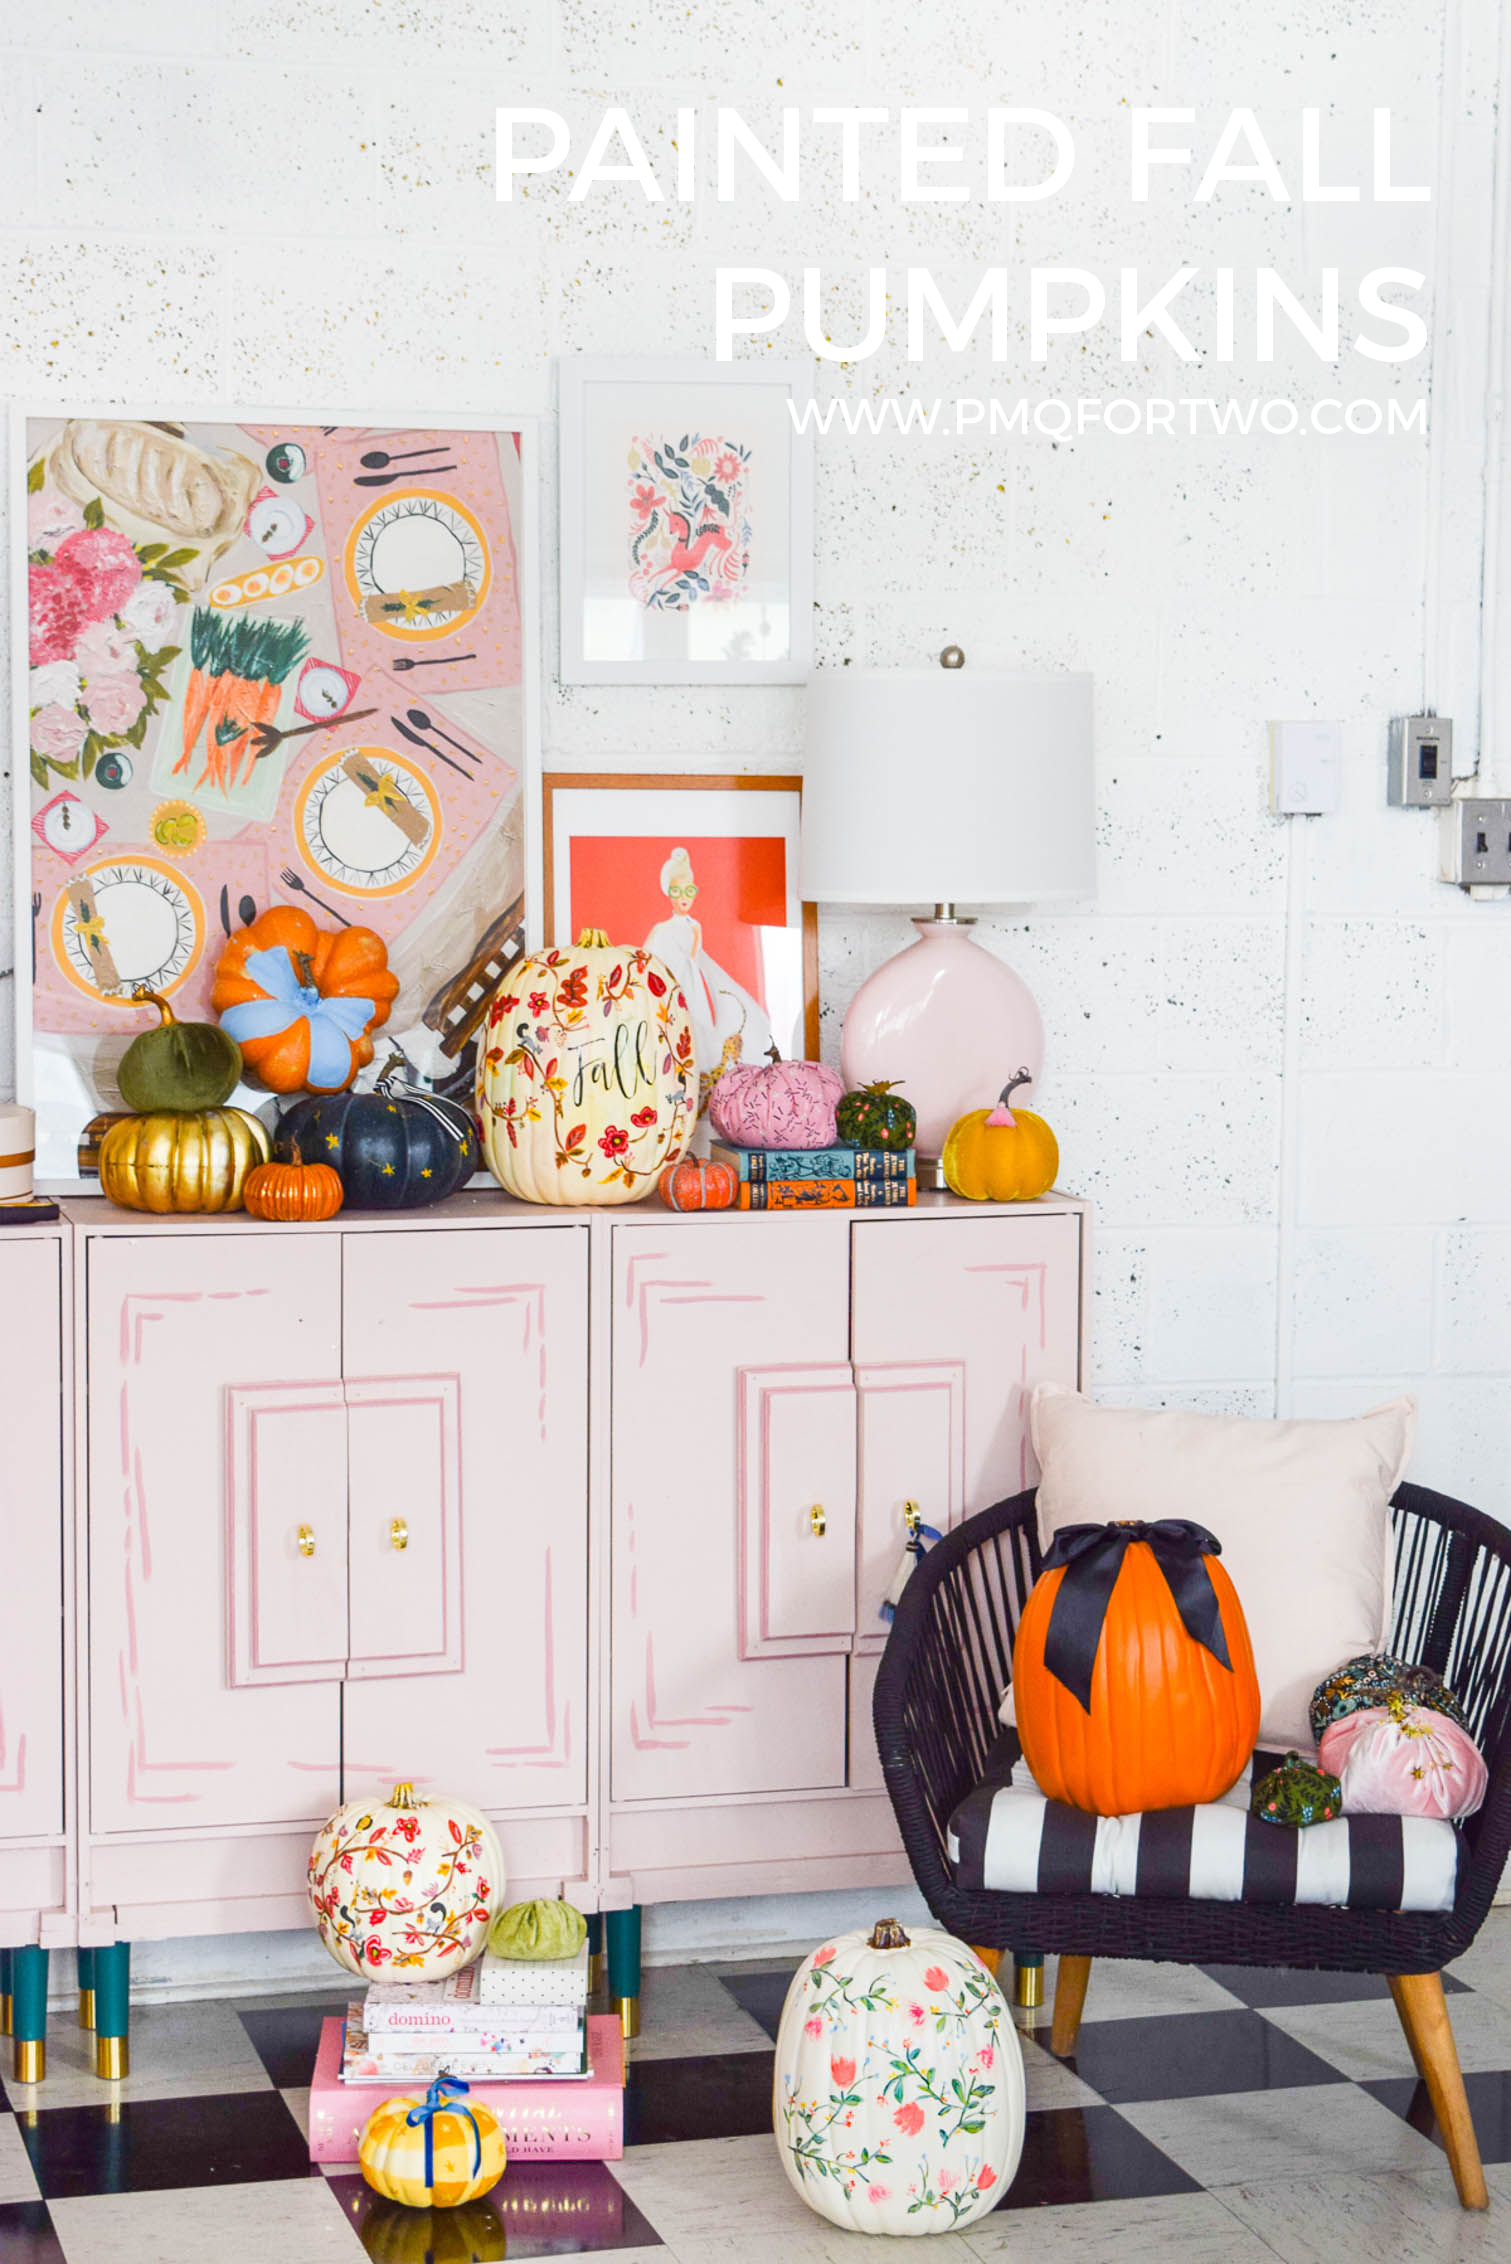 There's nothing like a fresh coat of paint to turn those generic plastic pumpkins into works of art. I've got a few different styles of DIY Painted Pumpkins & tutorials on the blog, so come check it out!